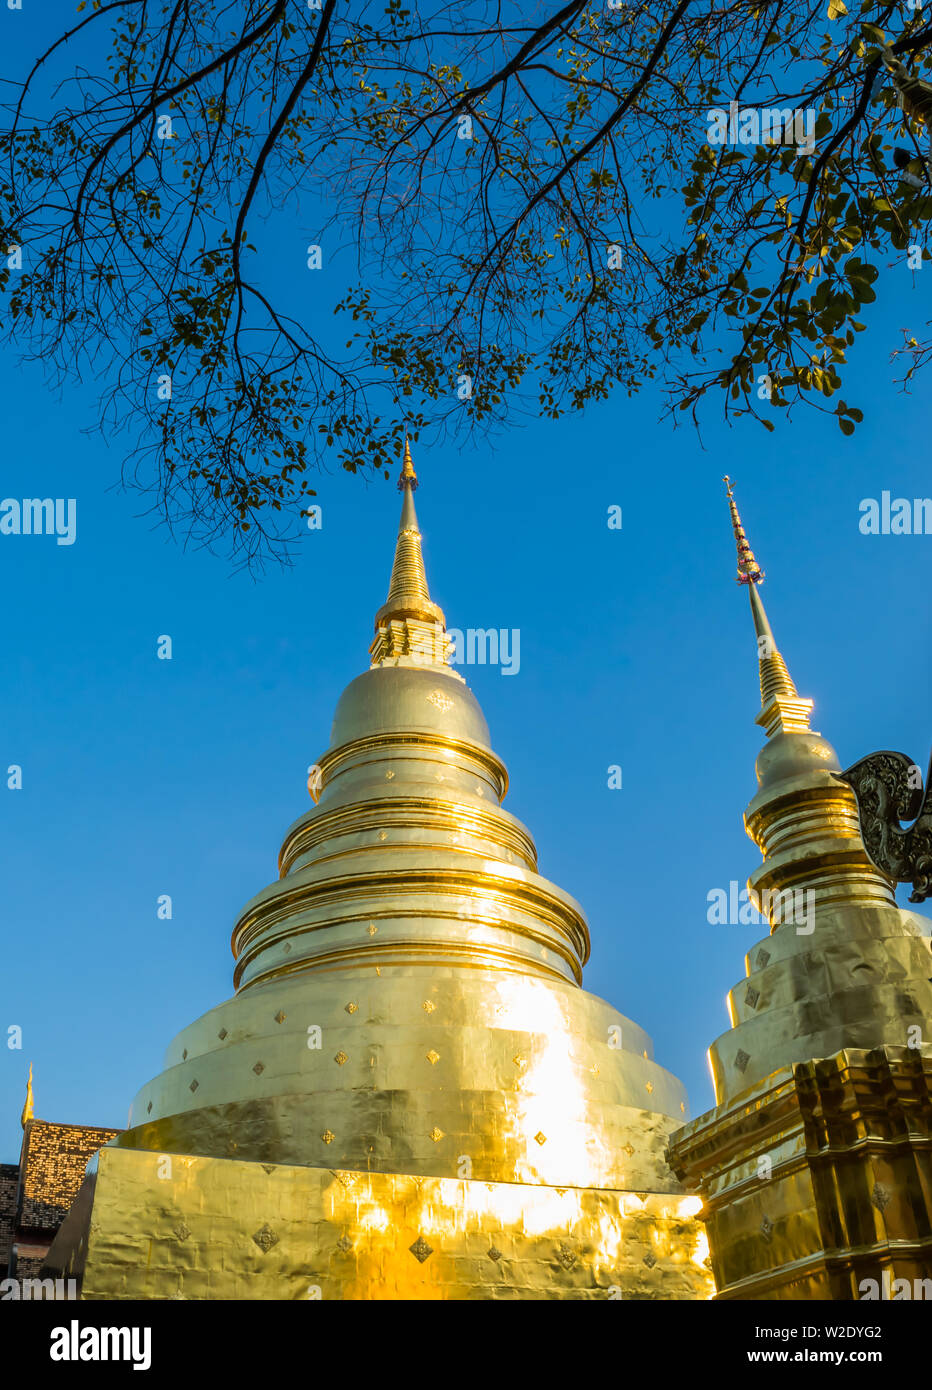 View of Wat Phra Singh with the golden pagoda, the popular historical landmark temple in Chiang Mai, Thailand Stock Photo